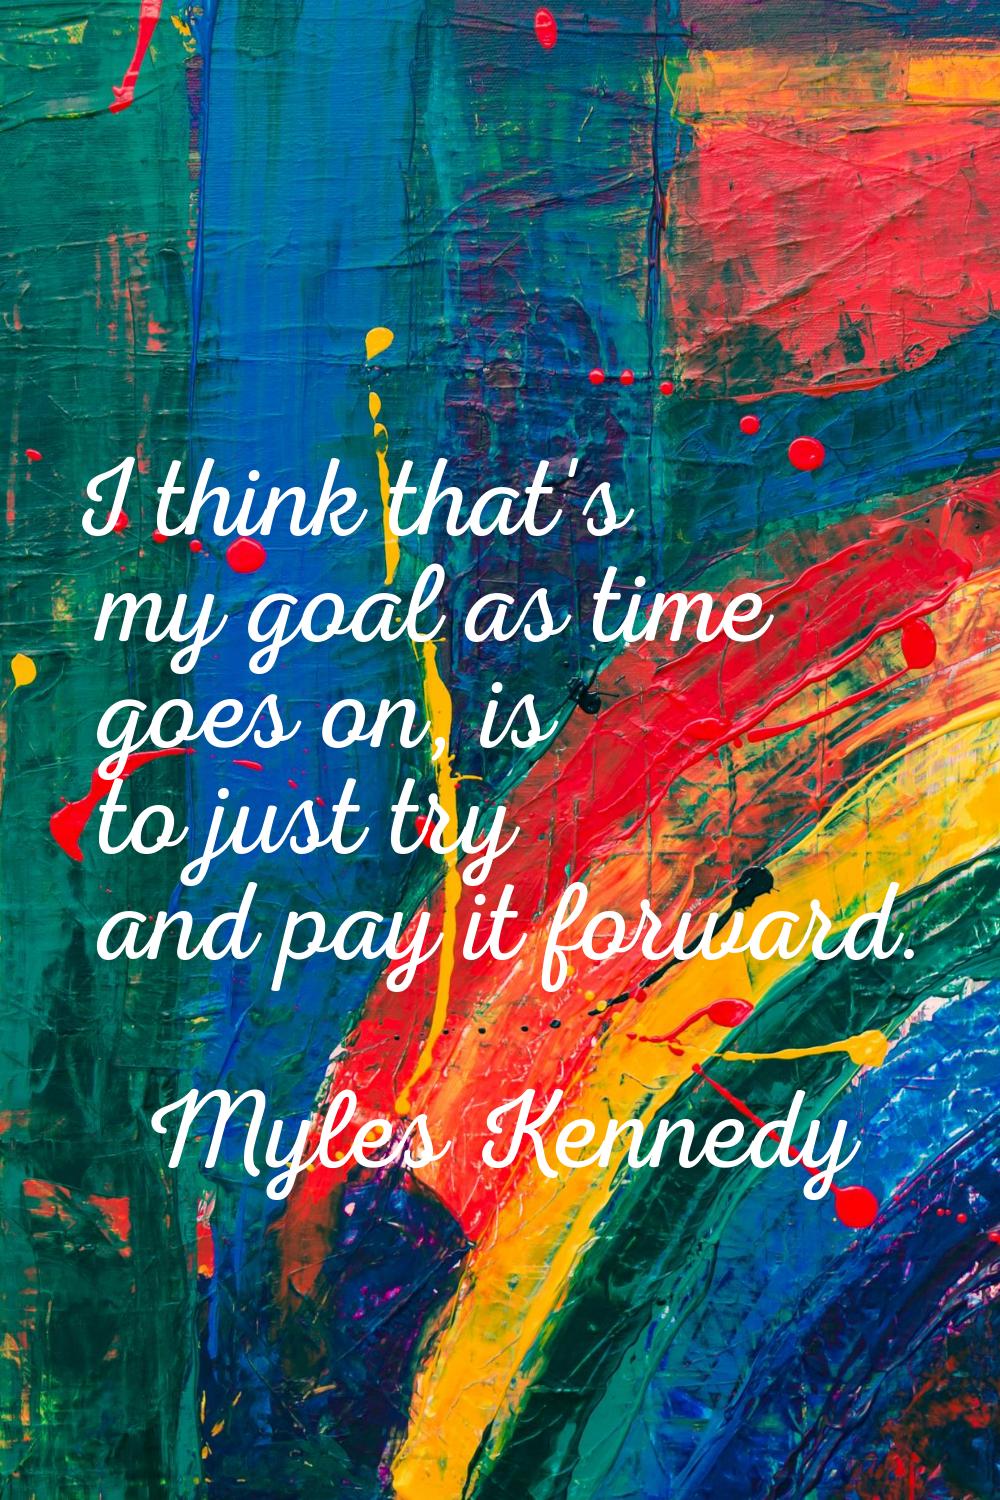 I think that's my goal as time goes on, is to just try and pay it forward.